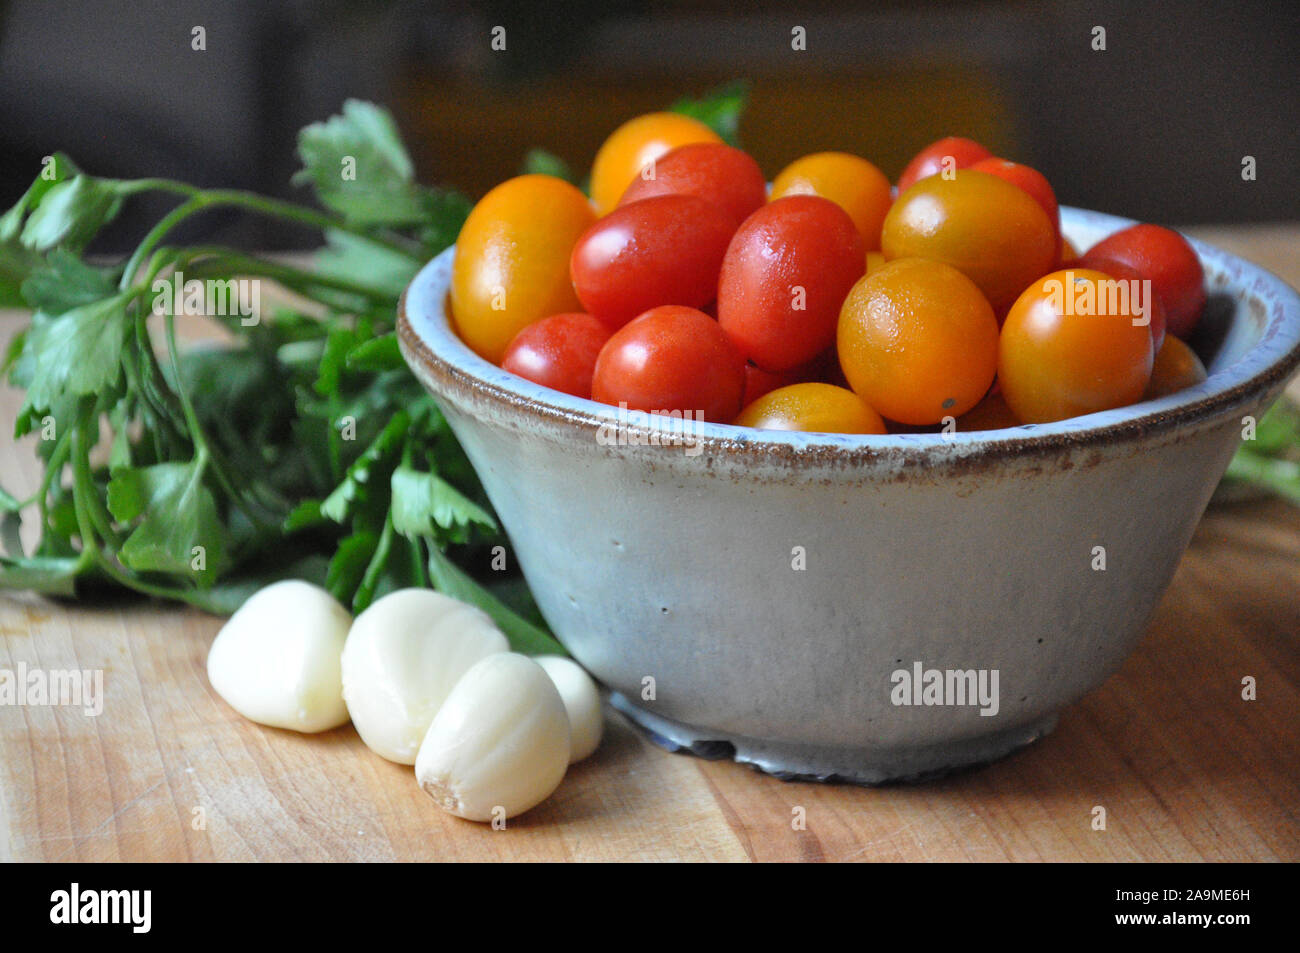 Cherry Tomatoes, garlic and parsley on a wooden cutting board Stock Photo